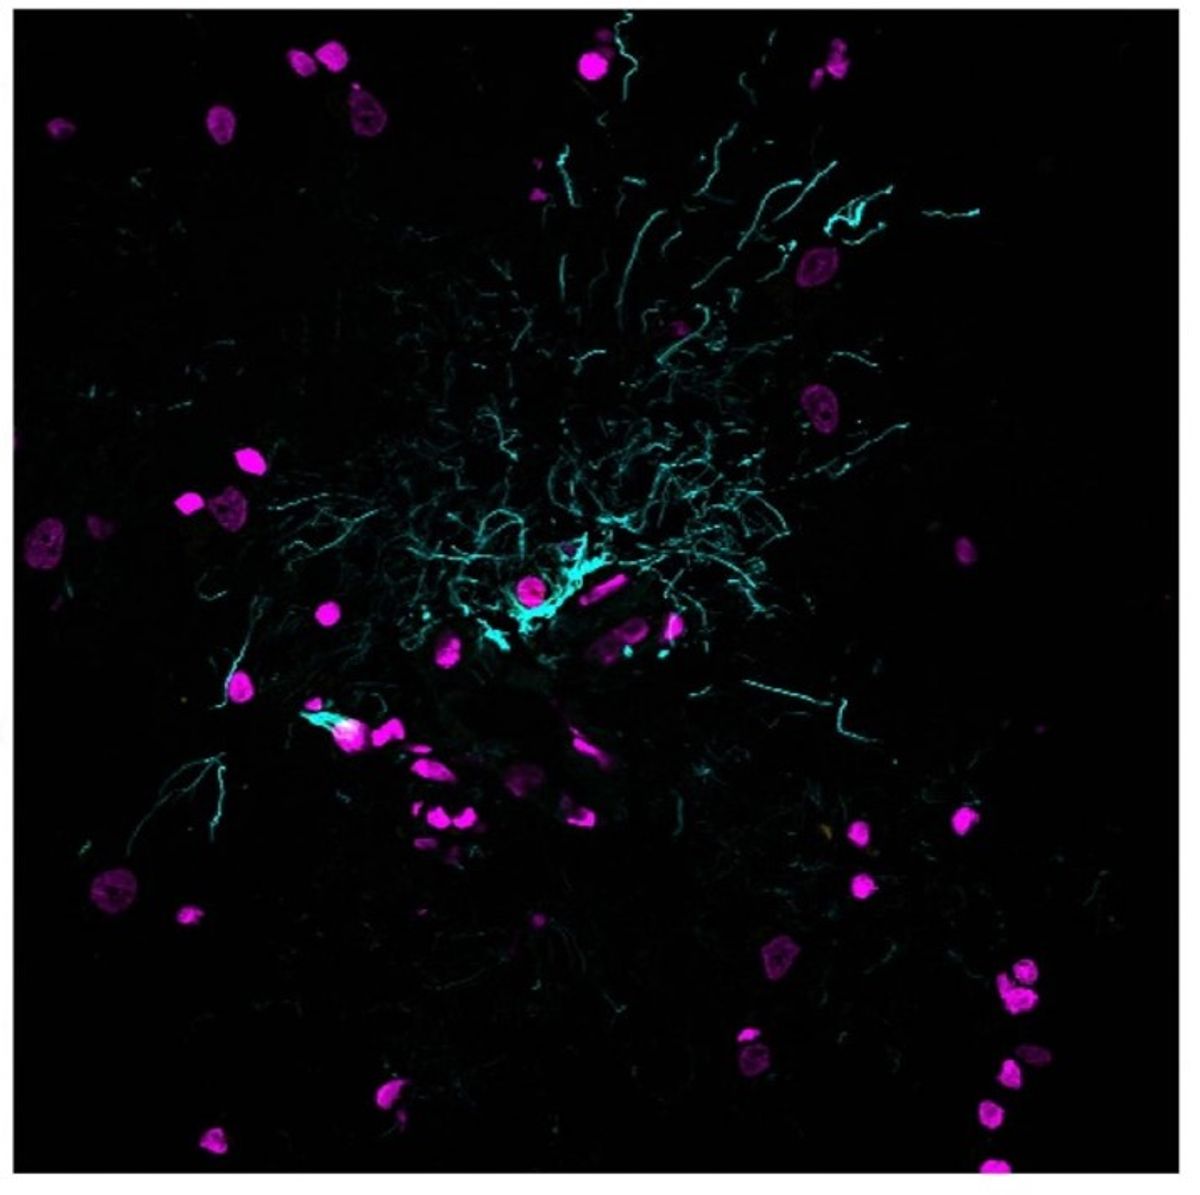 Lipofuscin autofluorescence was quenched using EverBrite TrueBlack® Hardset Mounting Medium®, allowing effective visualization of glial cells (GFAP antibody stain, cyan) and cell nuclei (magenta) in human cerebral cortex cryosections.